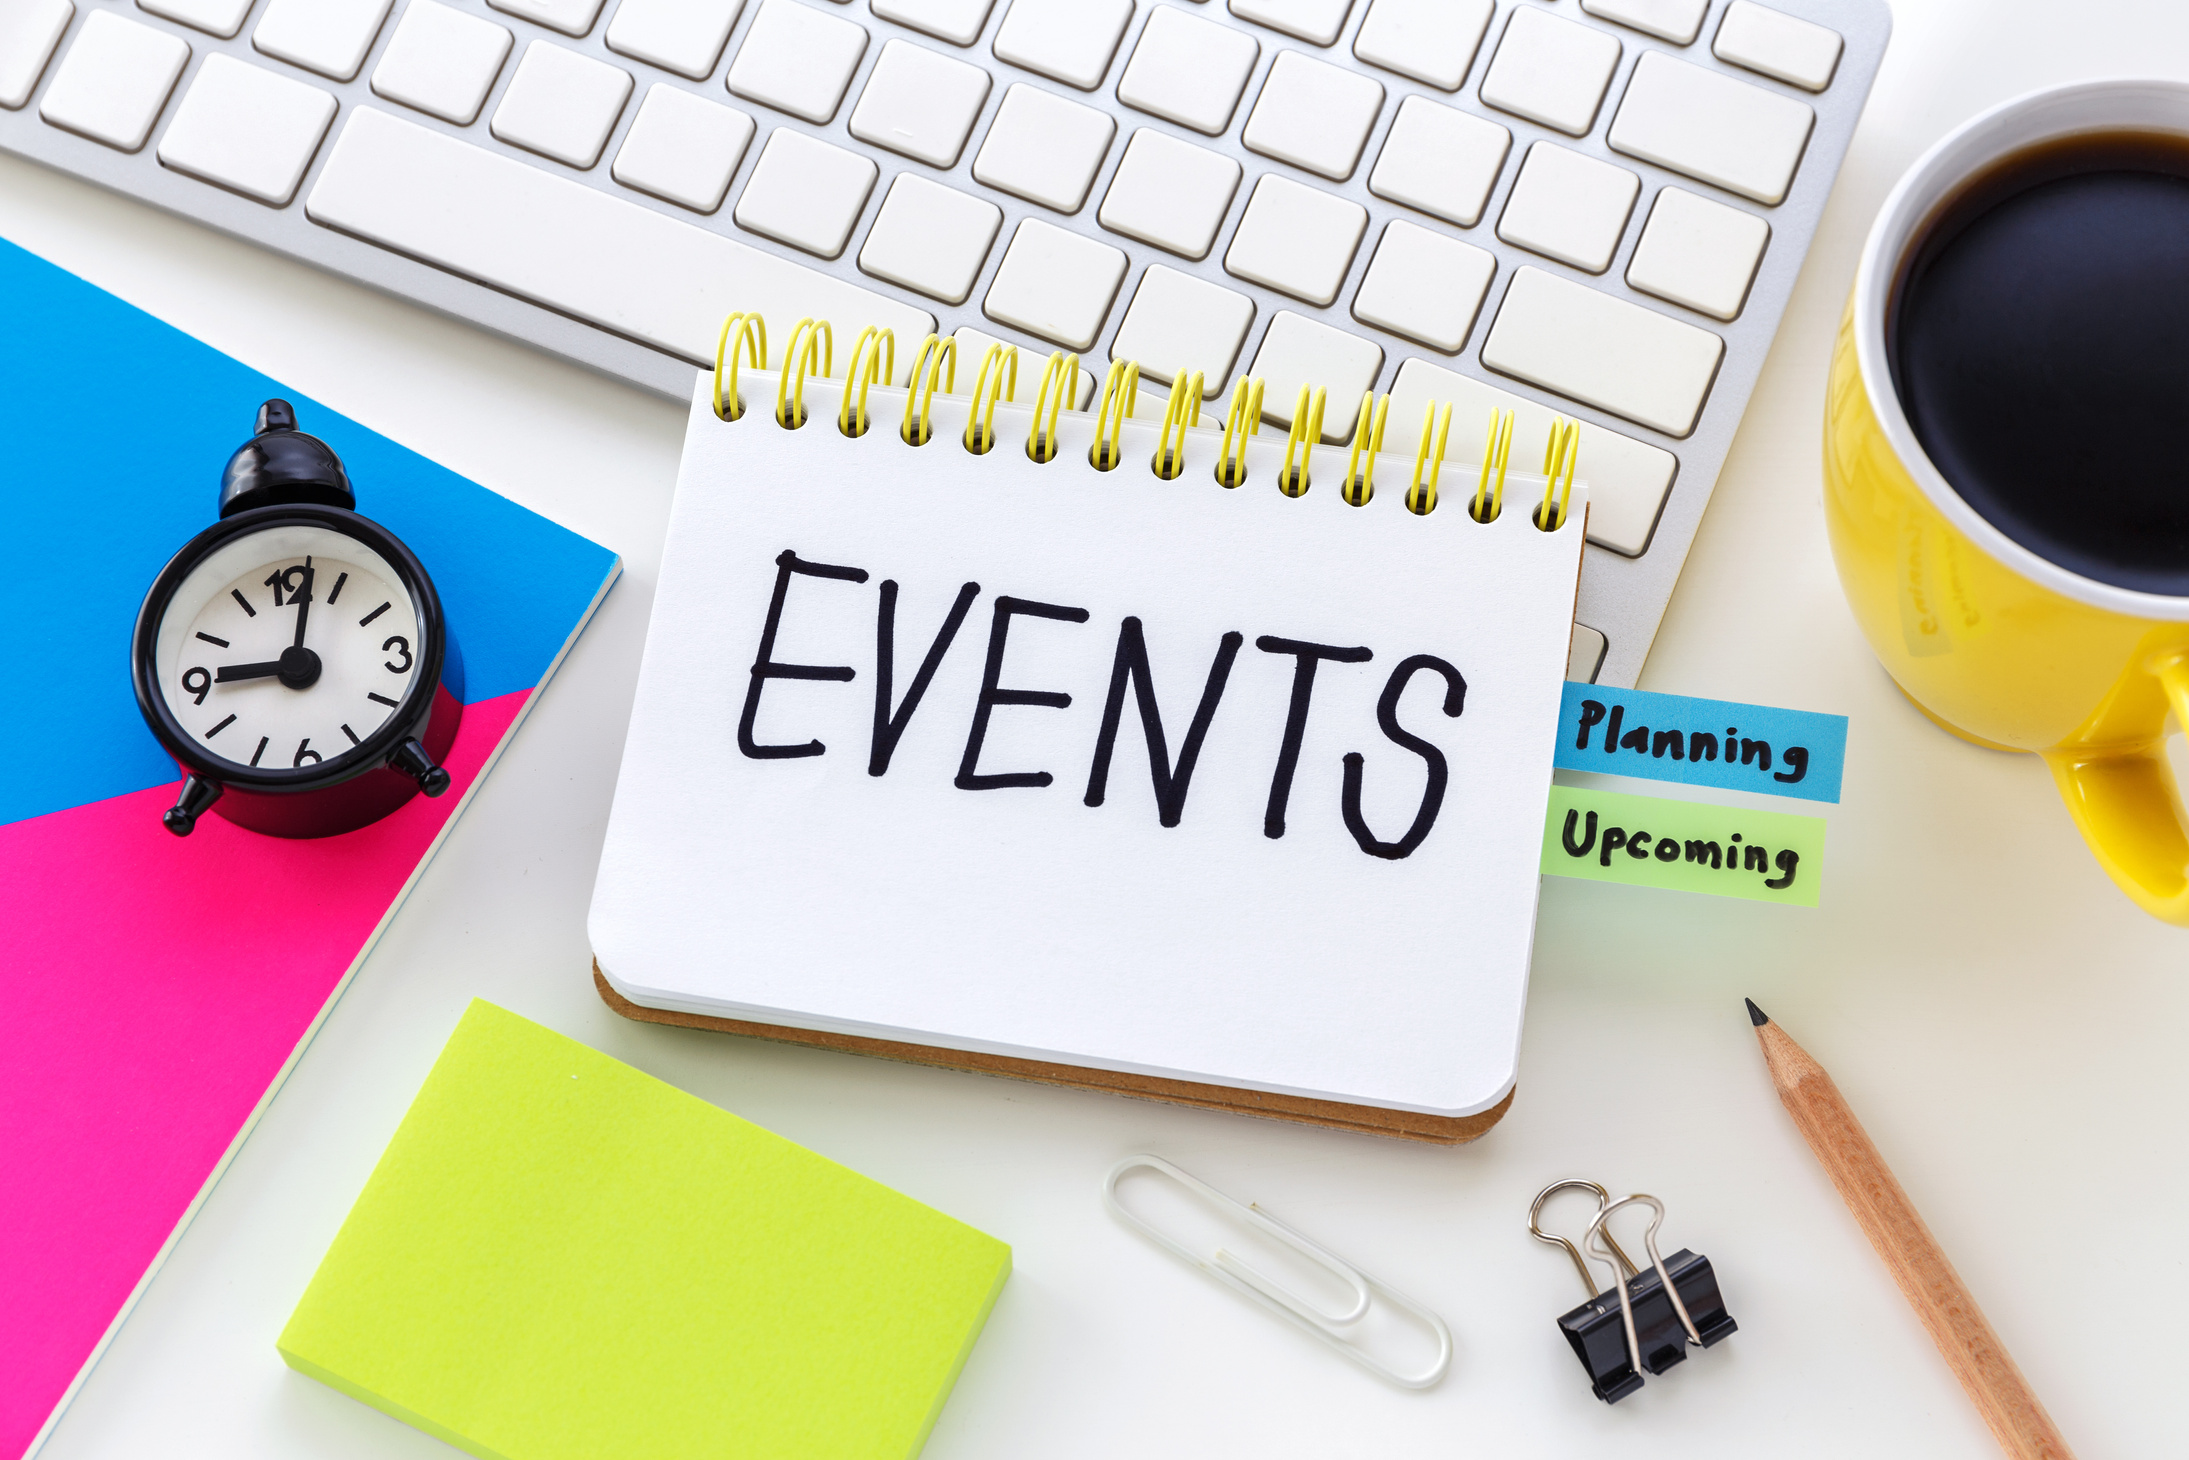 Event planning concept